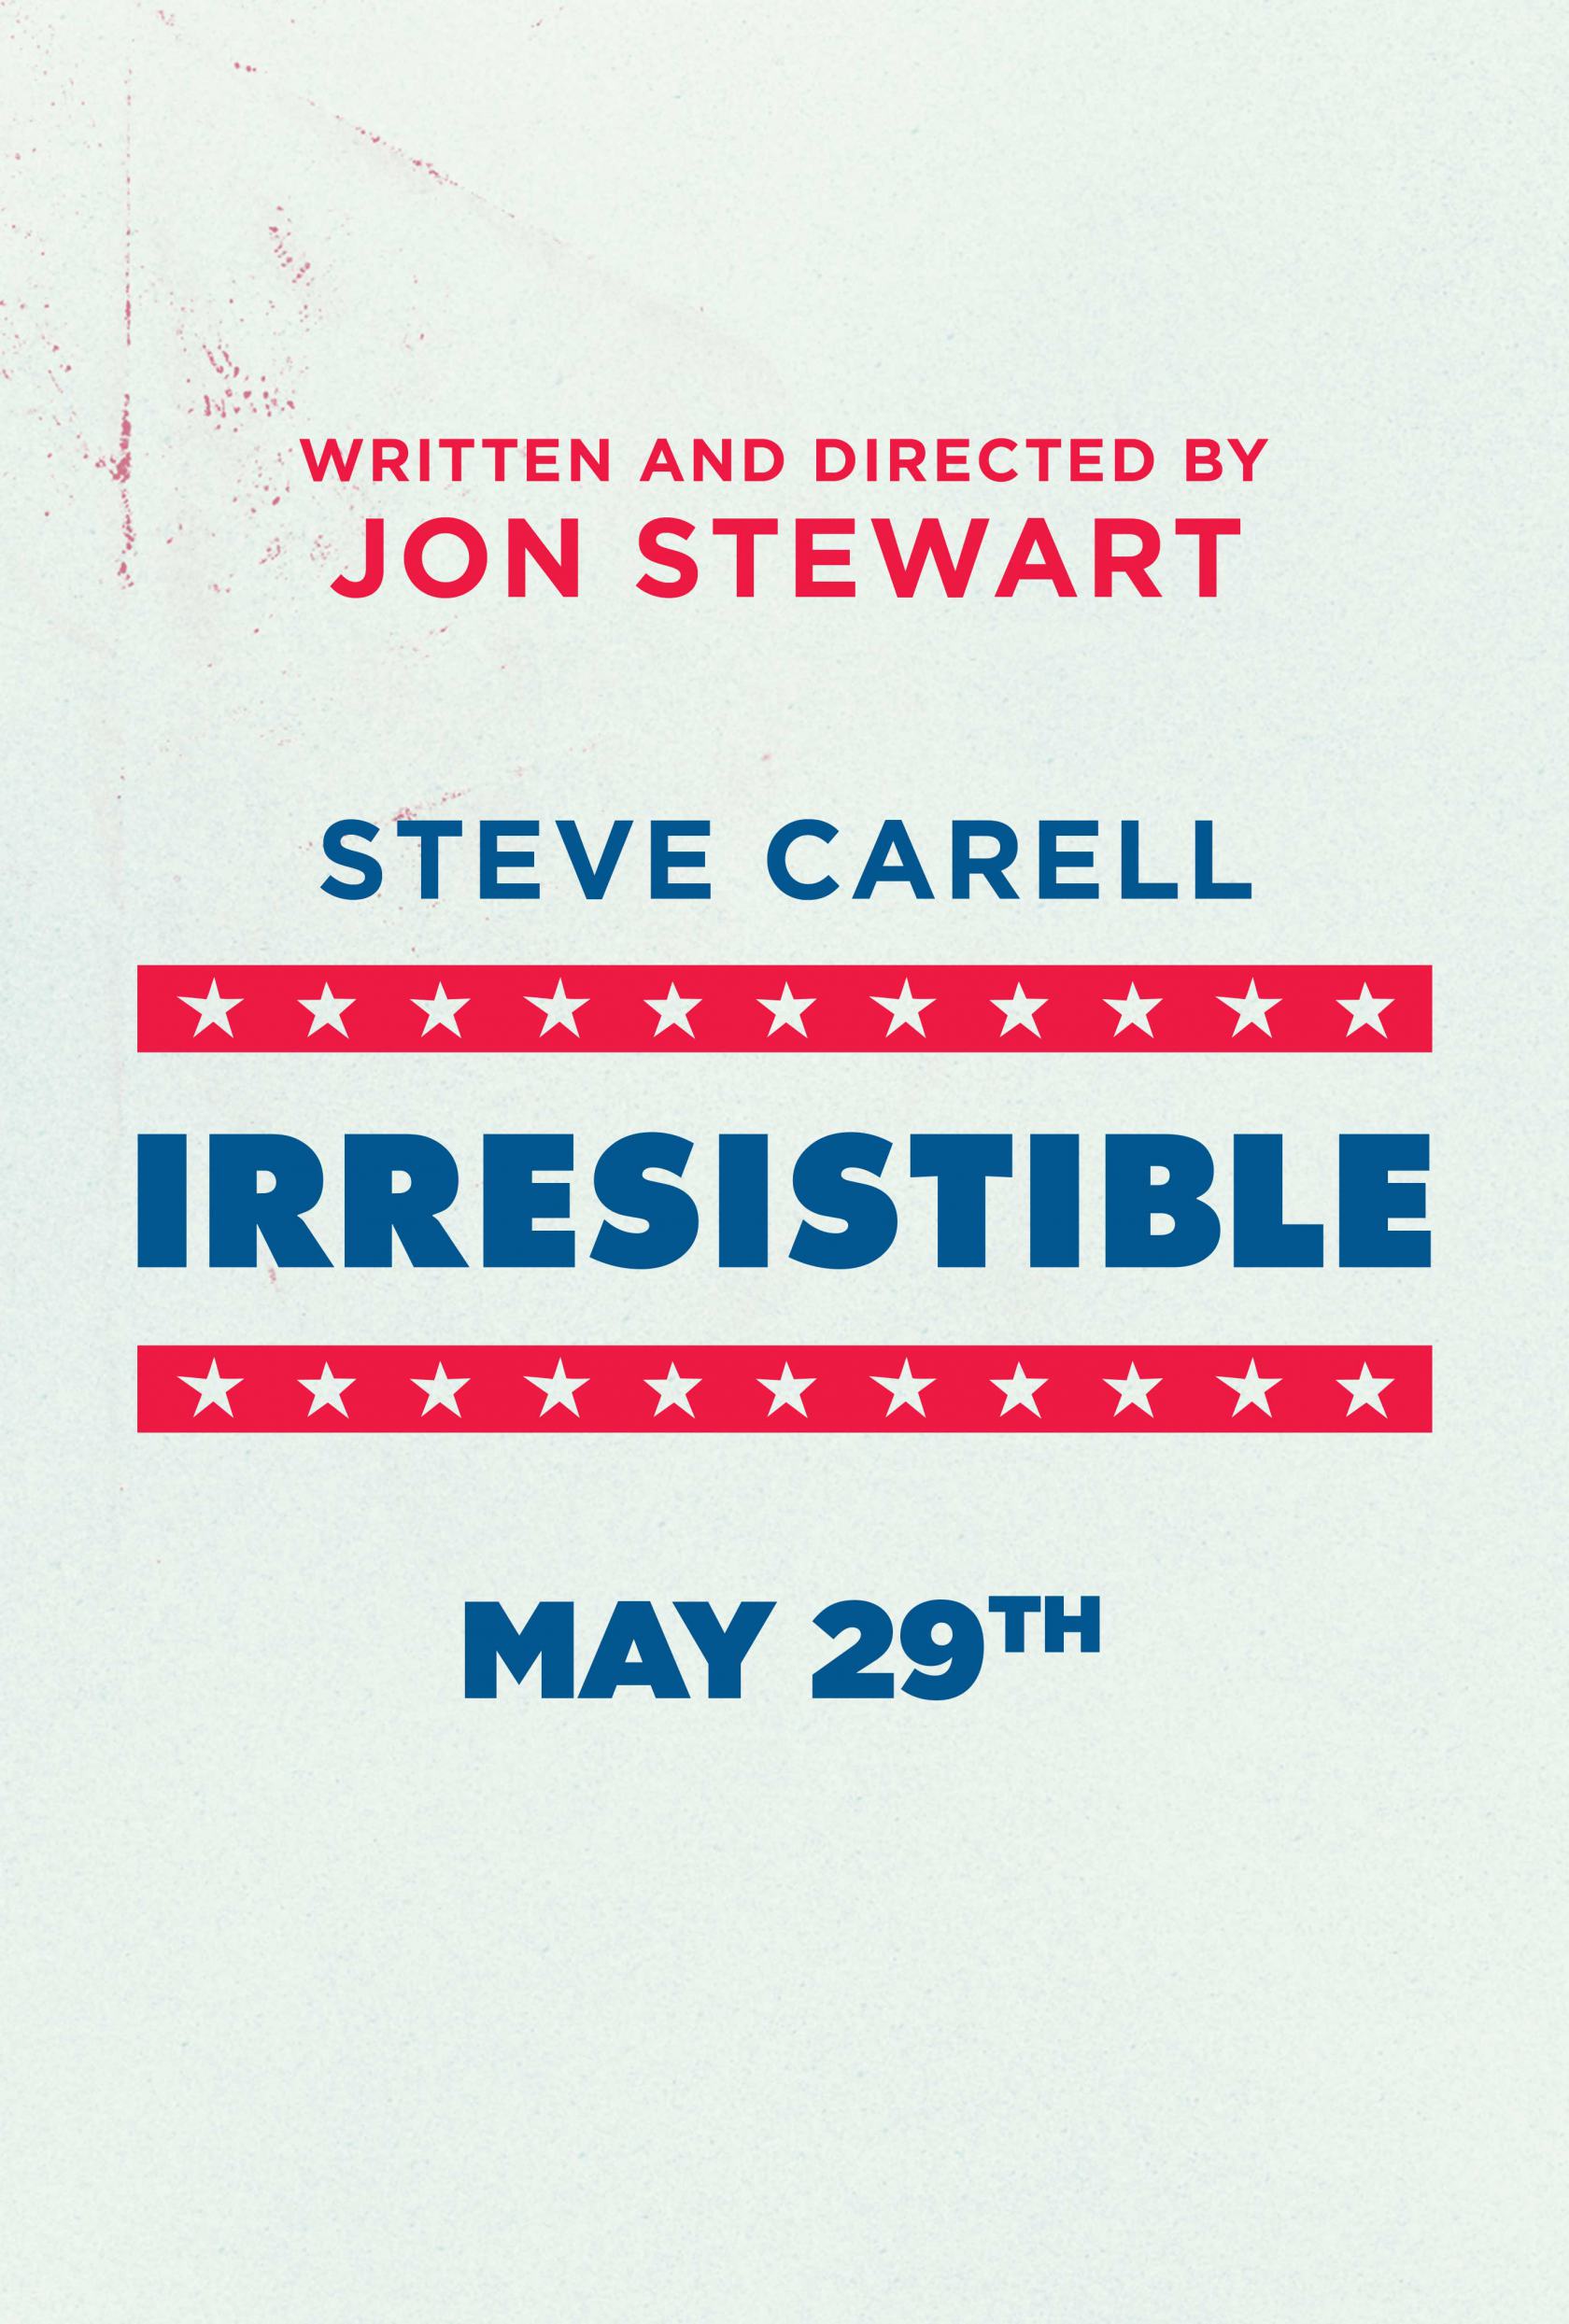 Irresistible with Steve Carell is hilarious - film review 